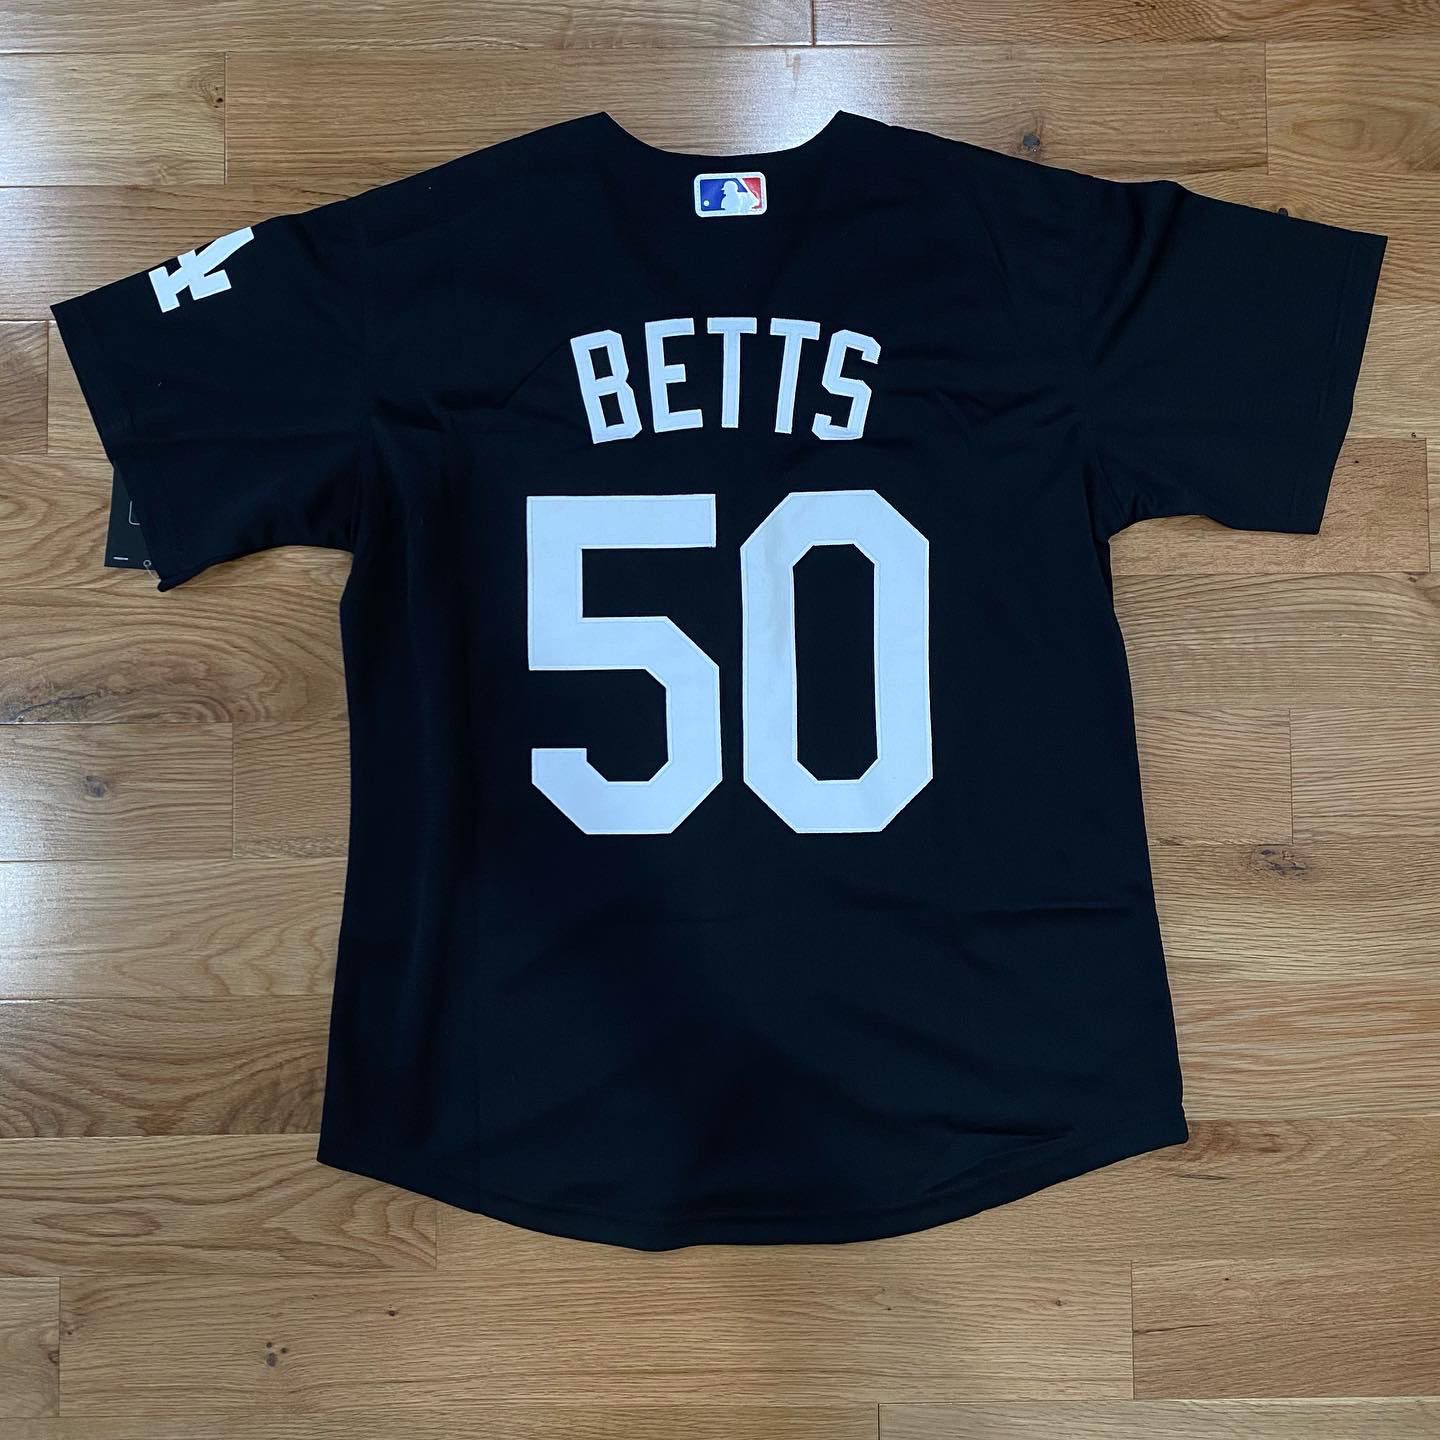 Mookie Betts Jersey for Sale in El Centro, CA - OfferUp